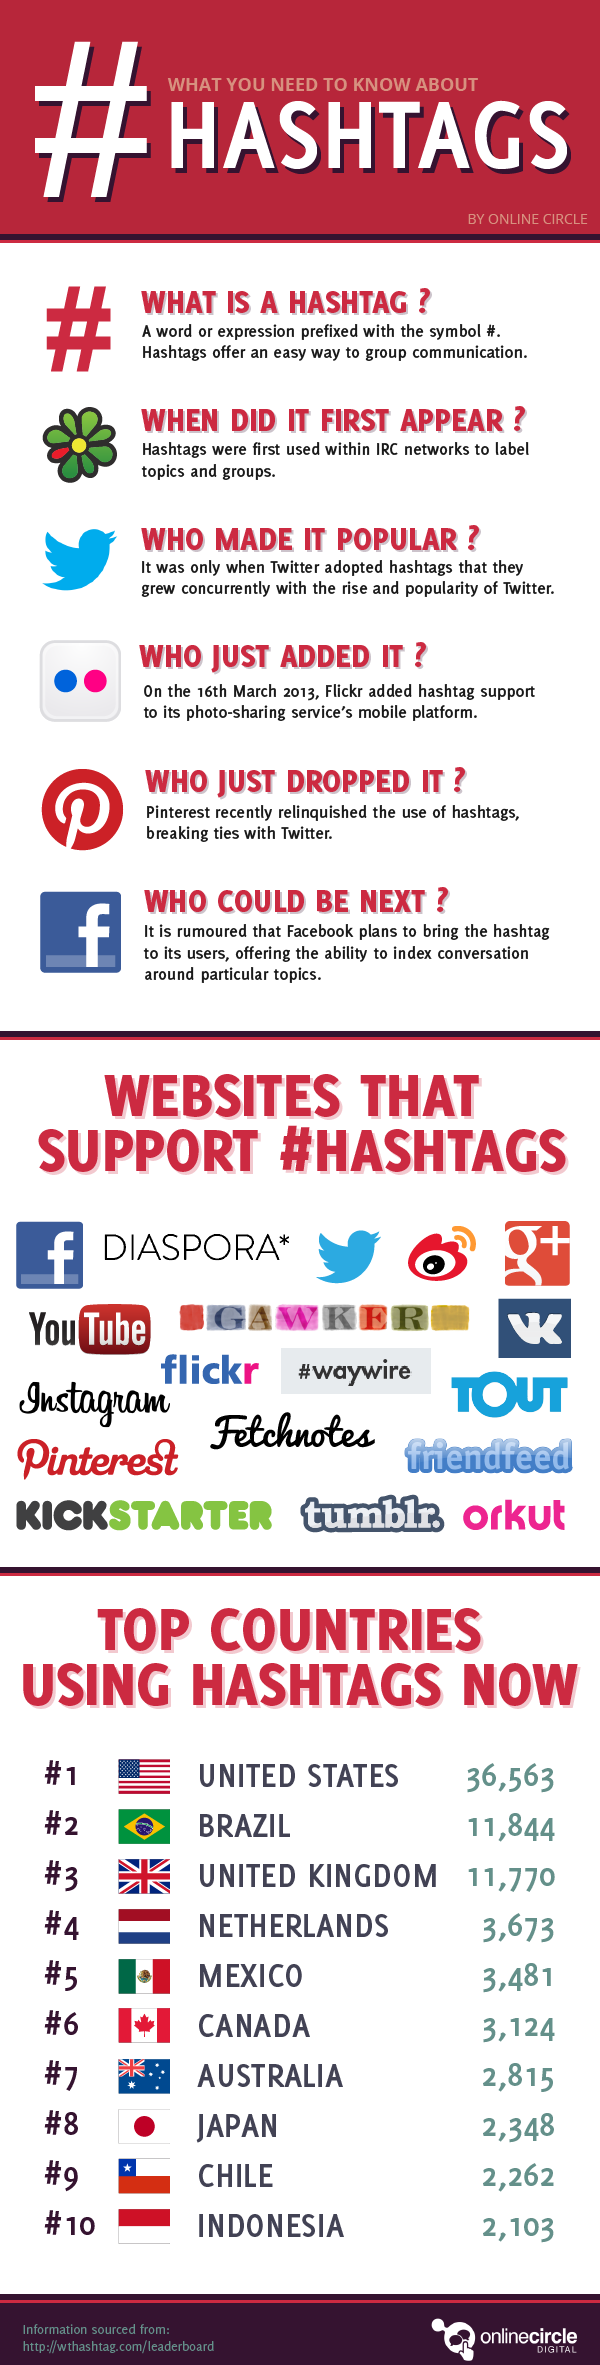 hashtags-guide